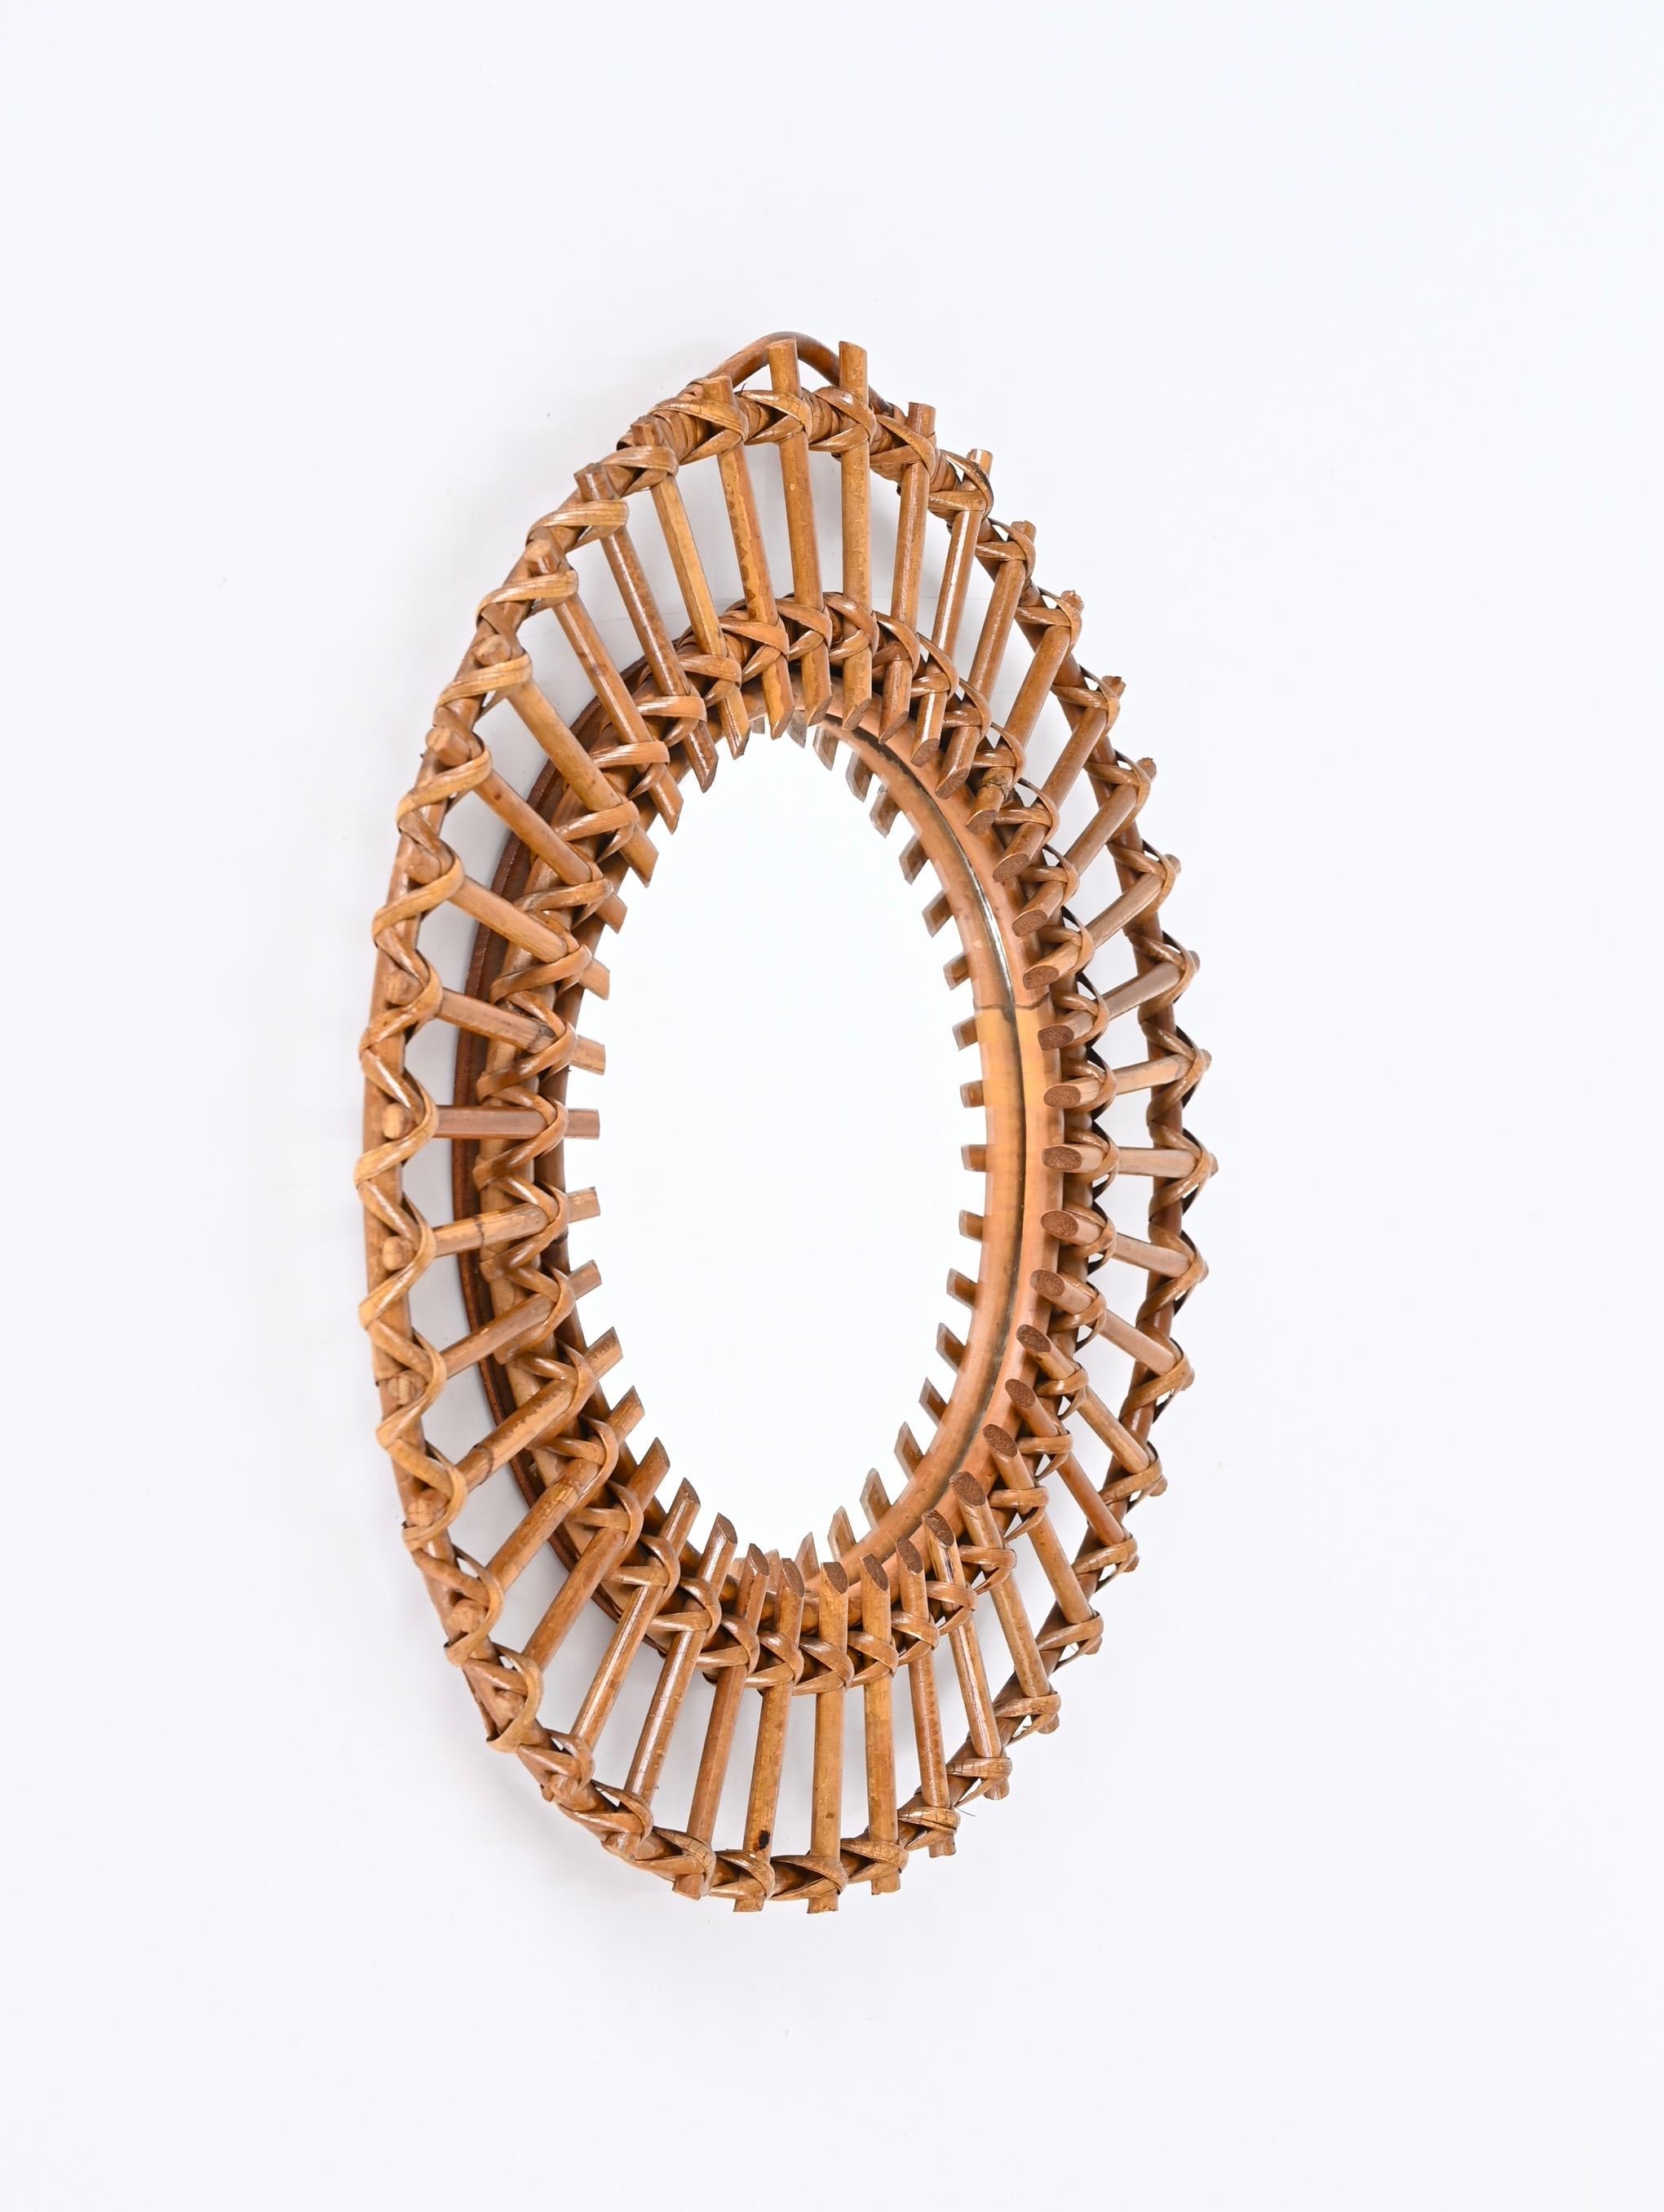 Gorgeous mid-century French Riviera rattan and bamboo Italian round mirror, this beautiful mirror was produced in Italy during the 1960s.


This stunning mirror consists of two round frames in curved rattan decorated by straight rattan beams that